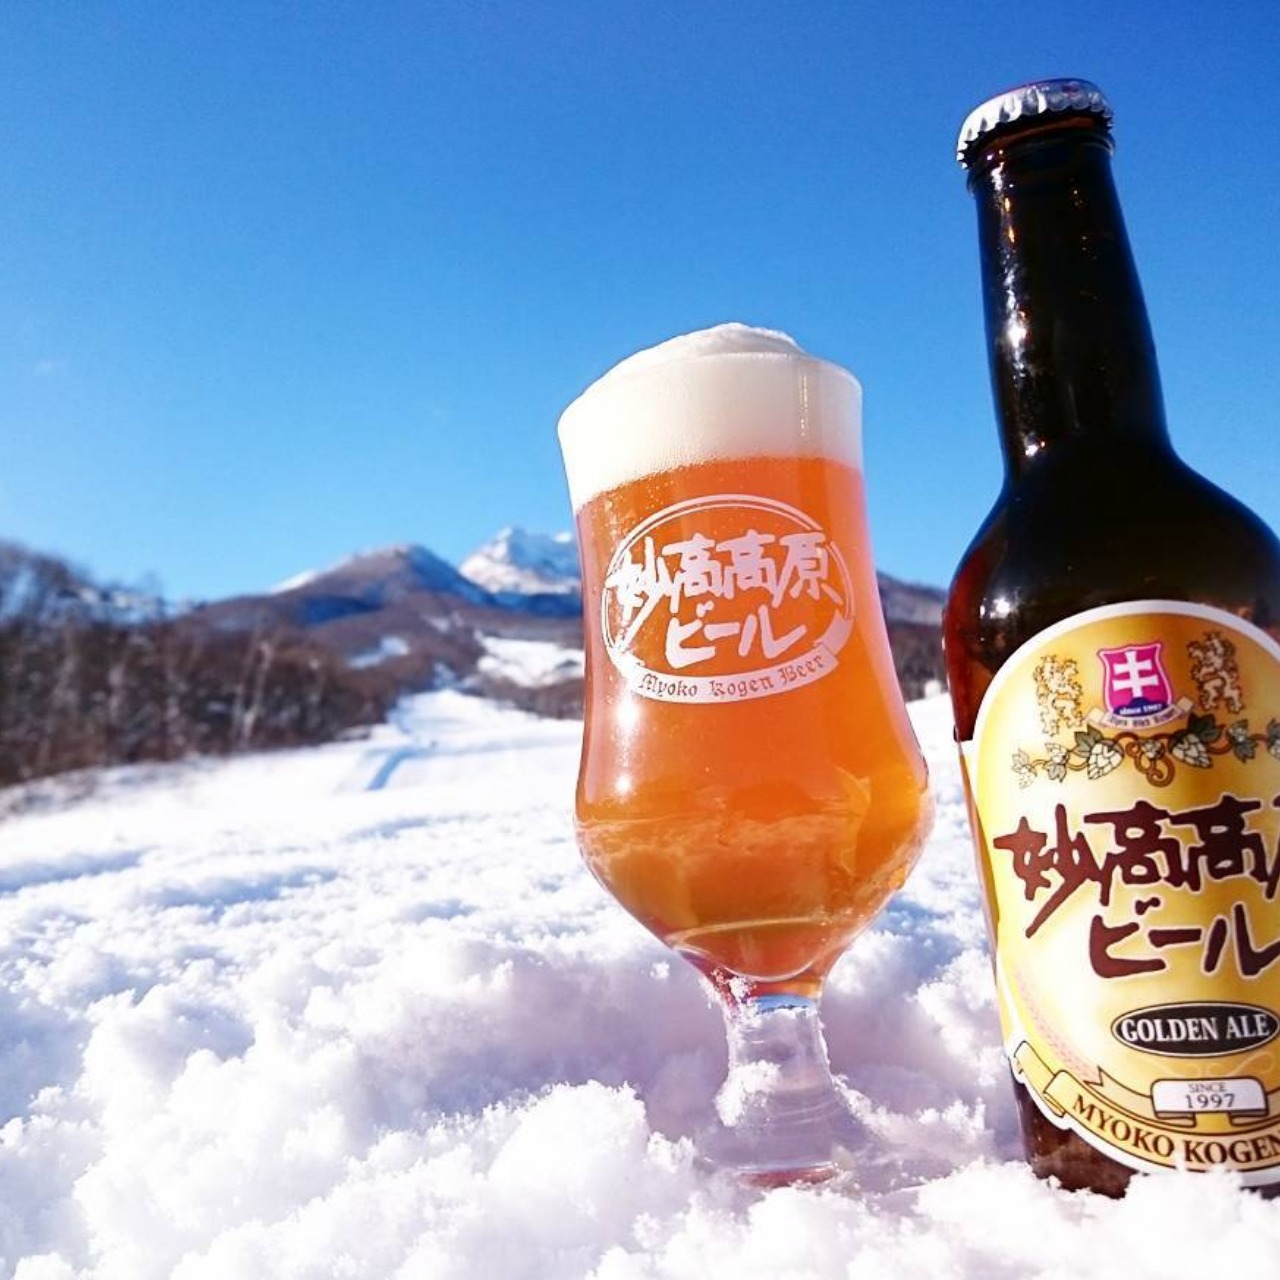 Japanese Craft Beers from the Snow Country